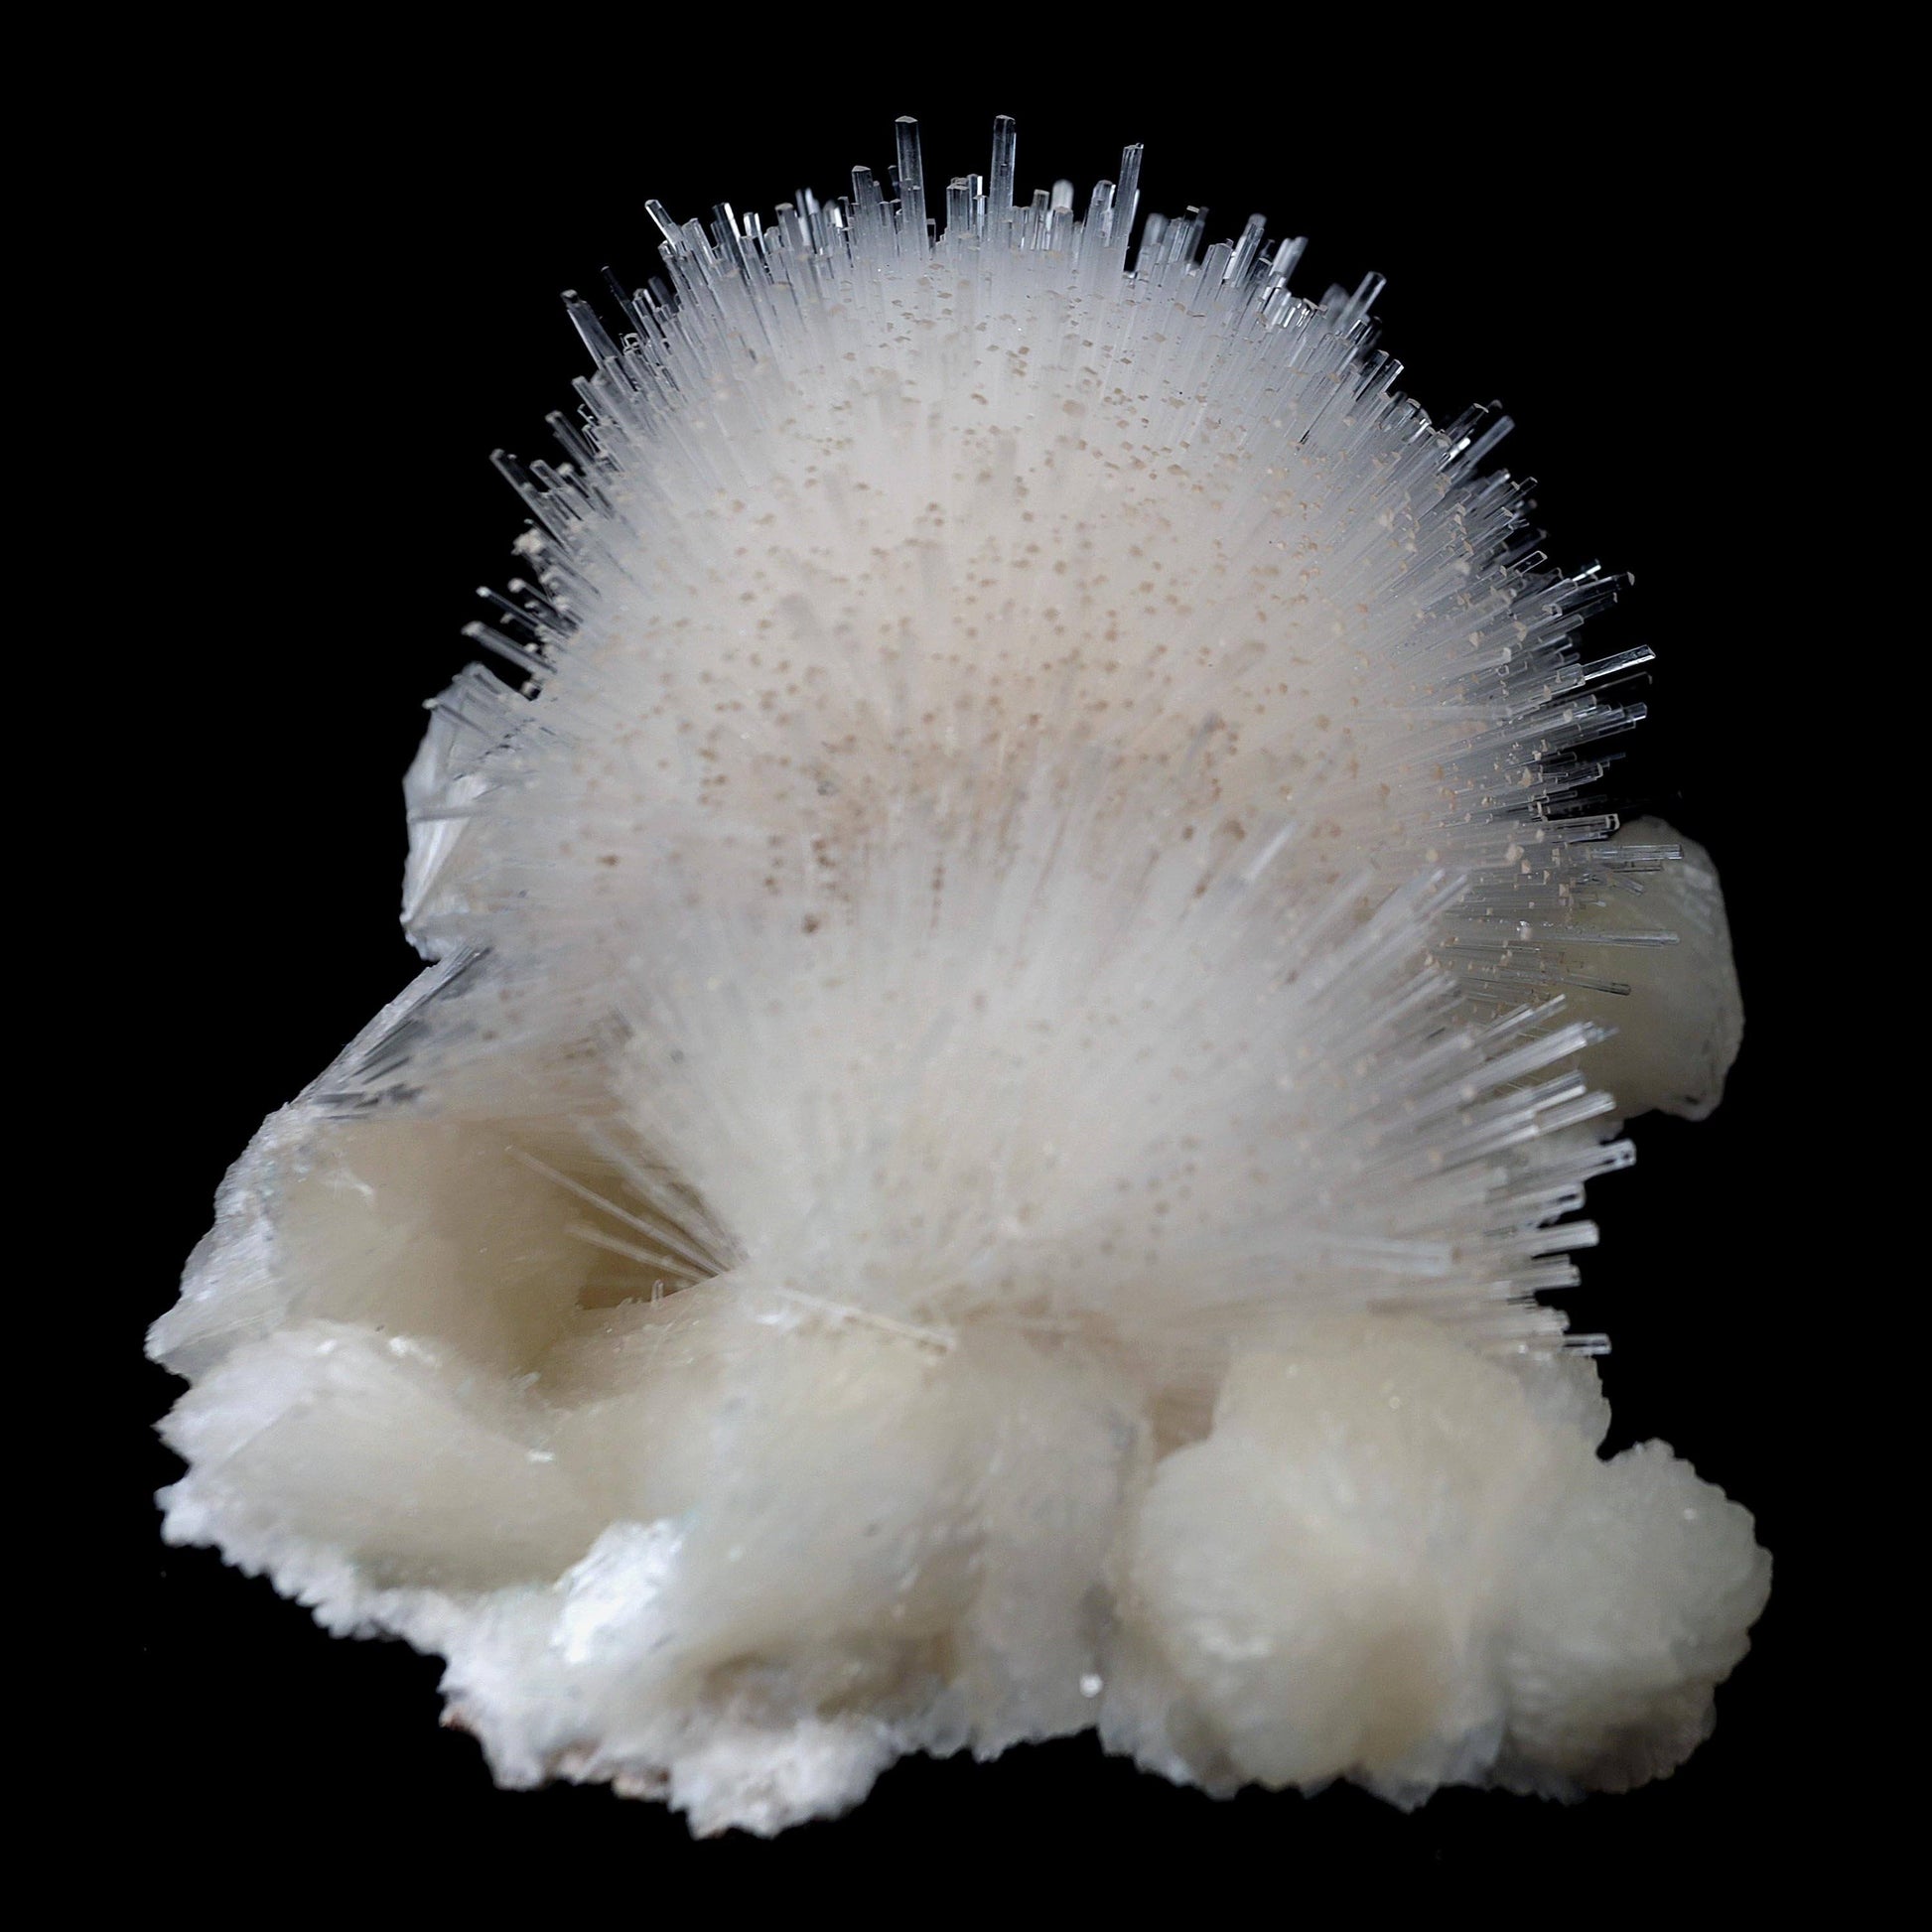 Scoleicte On Stilbite # B 4358  https://www.superbminerals.us/products/scoleicte-on-stilbite-b-4358  Features:A stunning specimen featuring a large, hemispherical formation of colorless, transparent, lustrous acicular Scolecite crystals on peach-colored Stilbite. An amazing piece with superb crystal formation, contrast, luster and contrast. In excellent condition. A great addition to any collection.